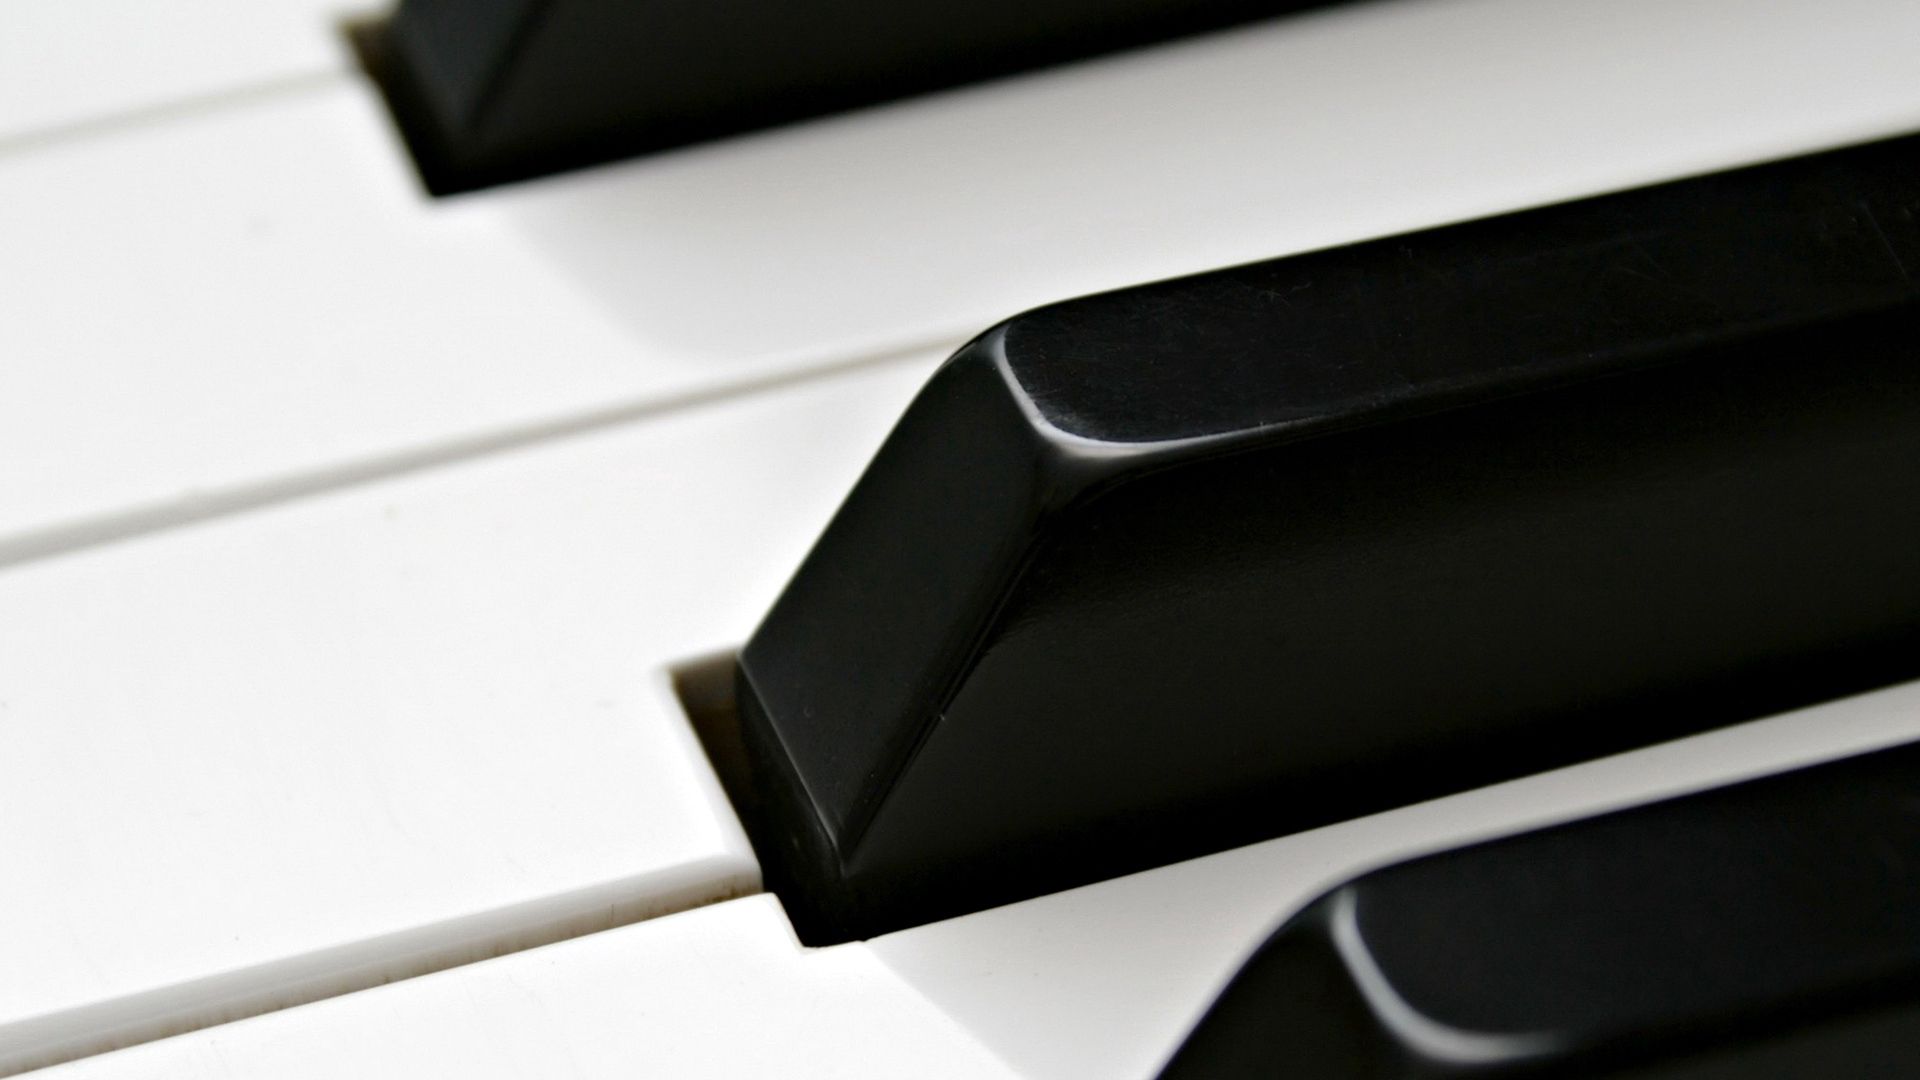 113940 download wallpaper piano, black, white, macro, keys, grand piano screensavers and pictures for free